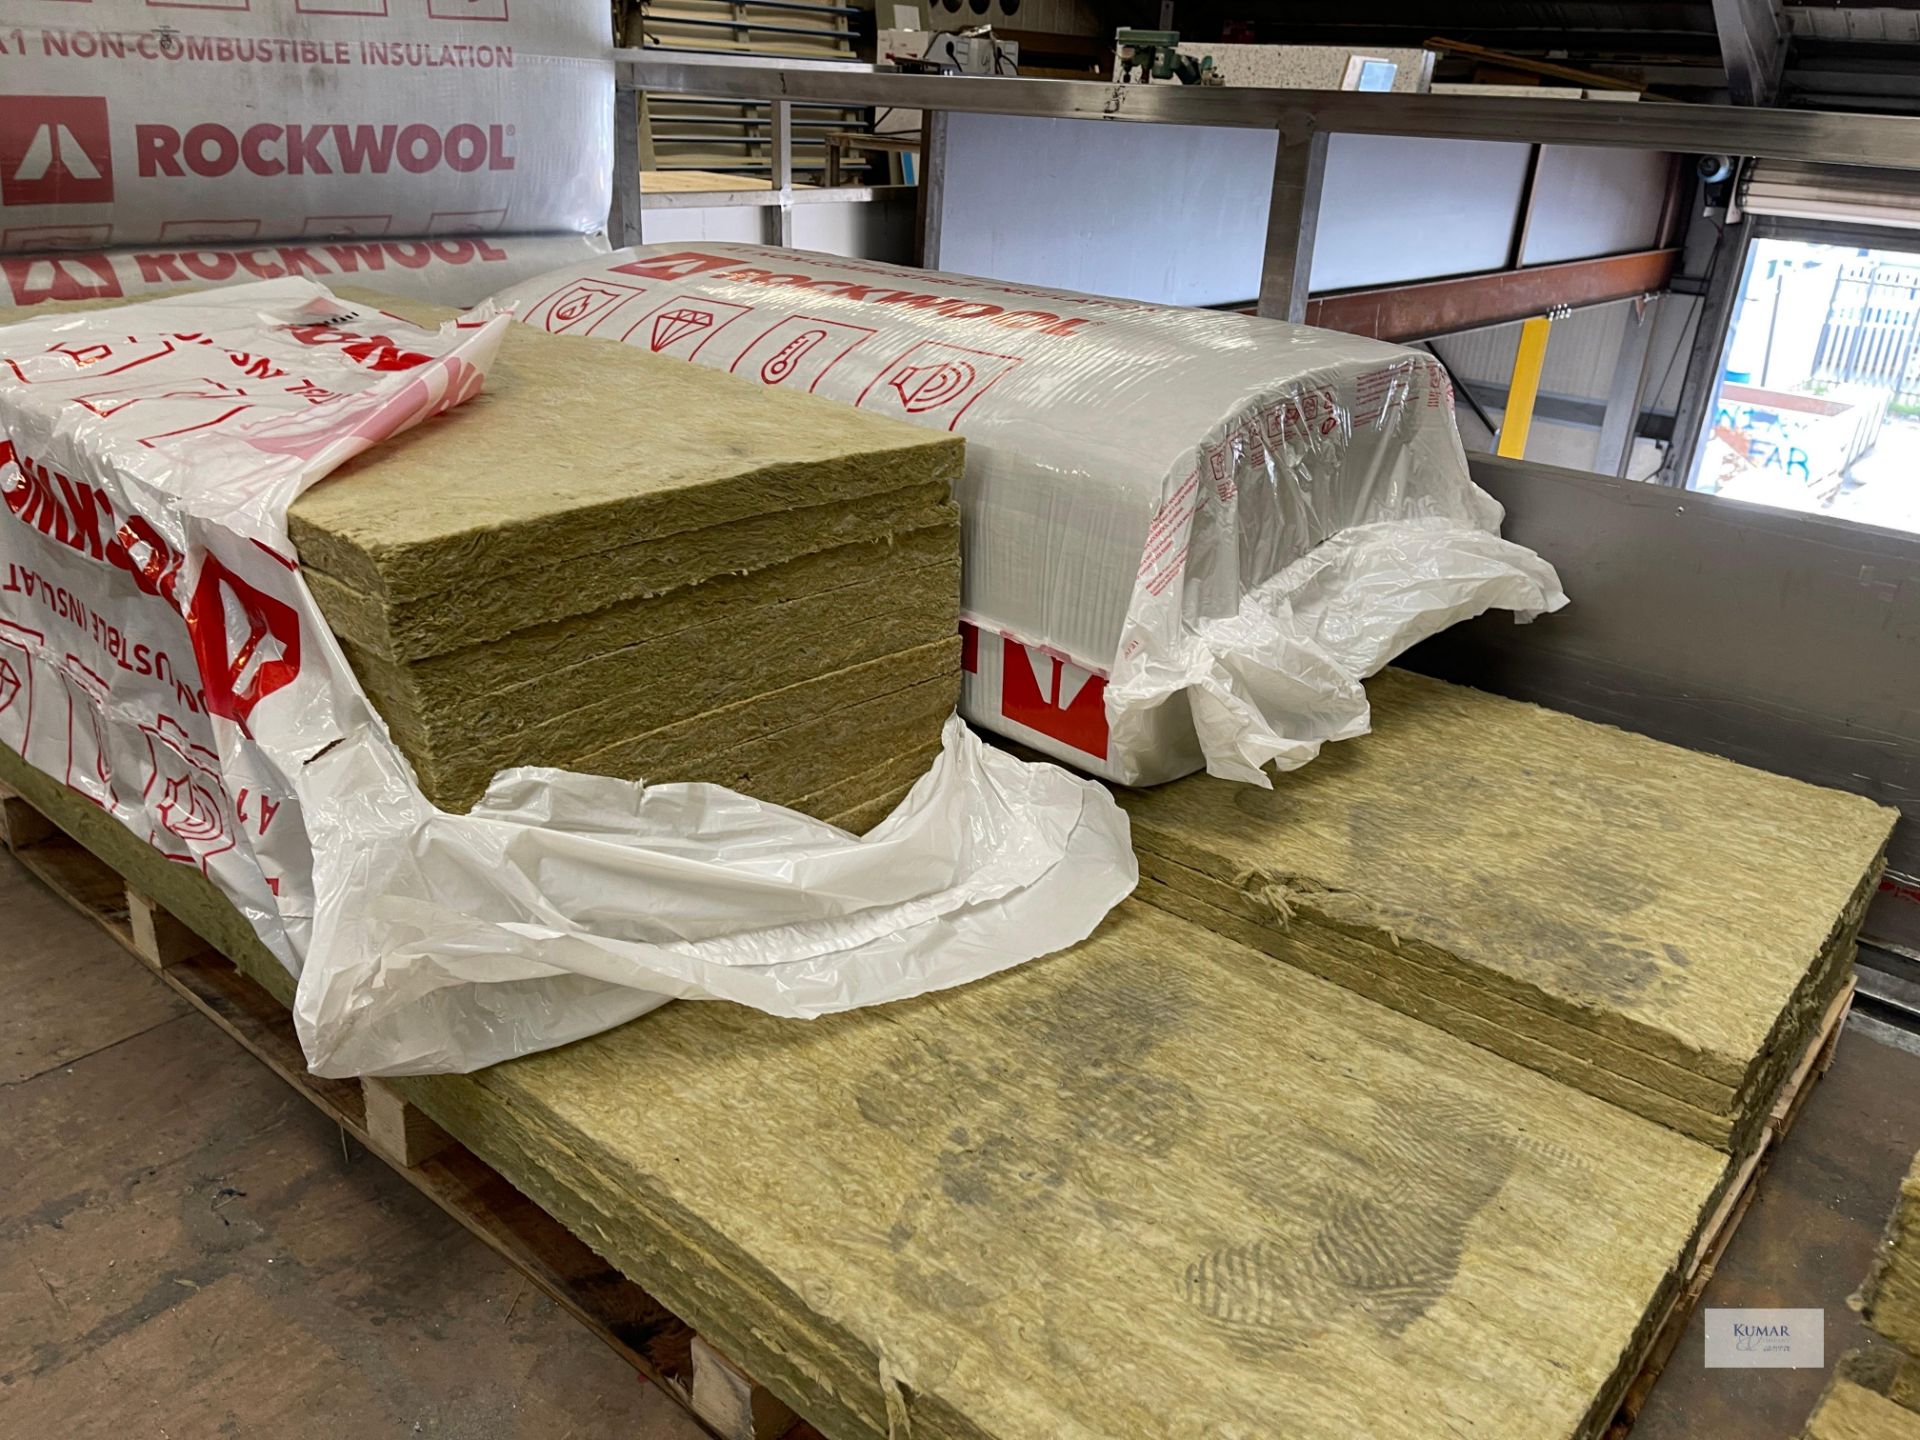 Quantity of RWA Rockwool A1 Non Combustible Insulation - Image 6 of 7